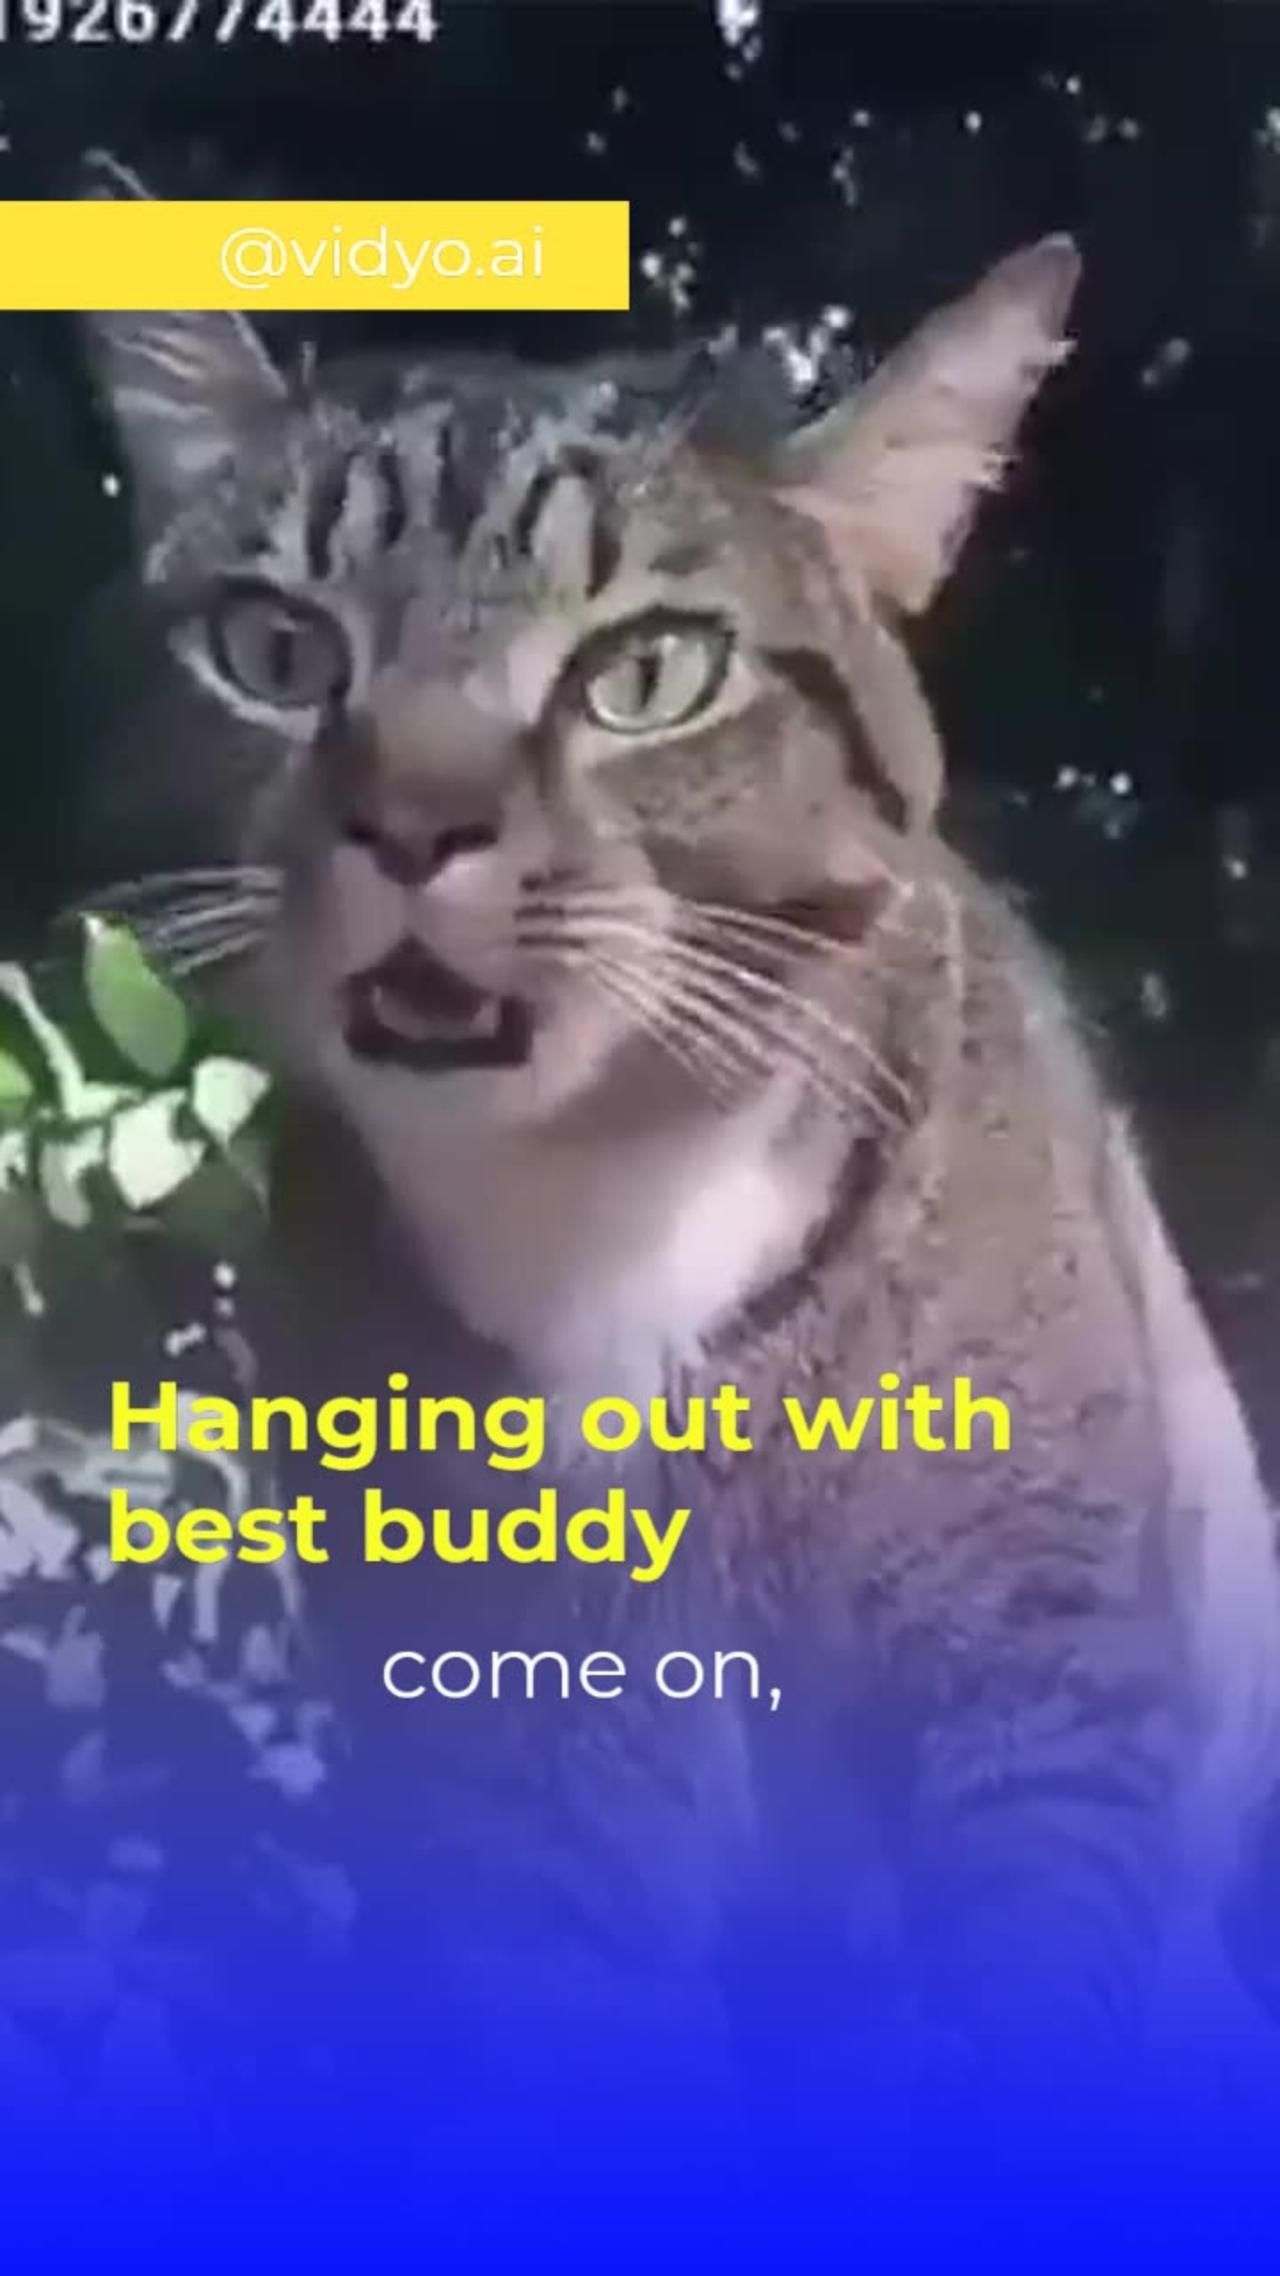 This cats are very naughty this video is very funny